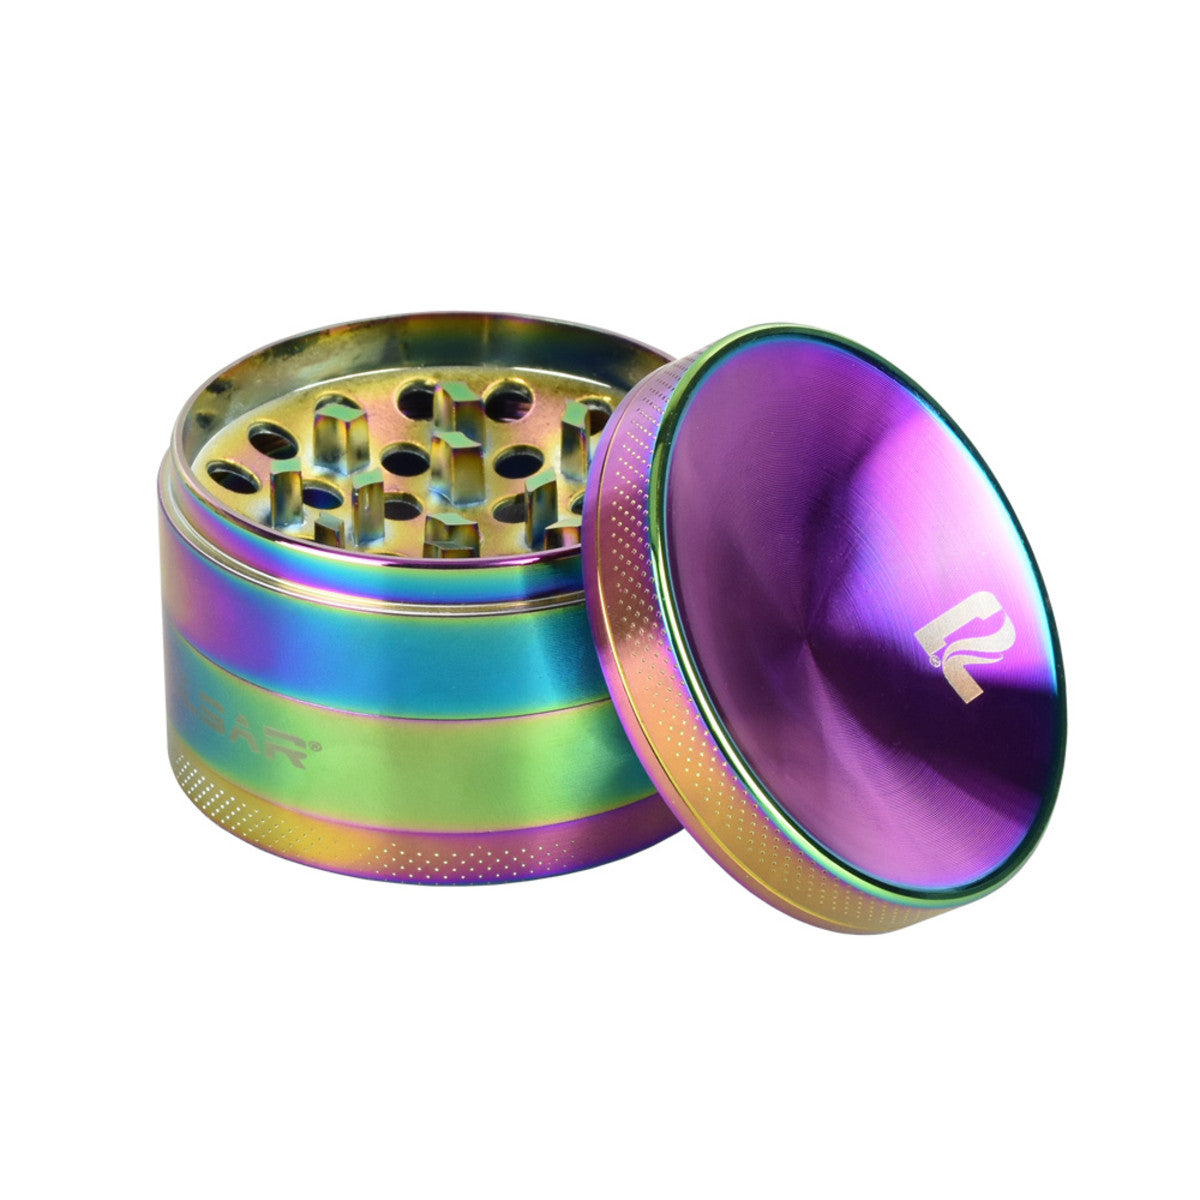 https://cdn.shopify.com/s/files/1/0268/8421/0734/products/pulsar-concave-rainbow-anodized-aluminum-grinder.jpg?v=1660439669&width=1200